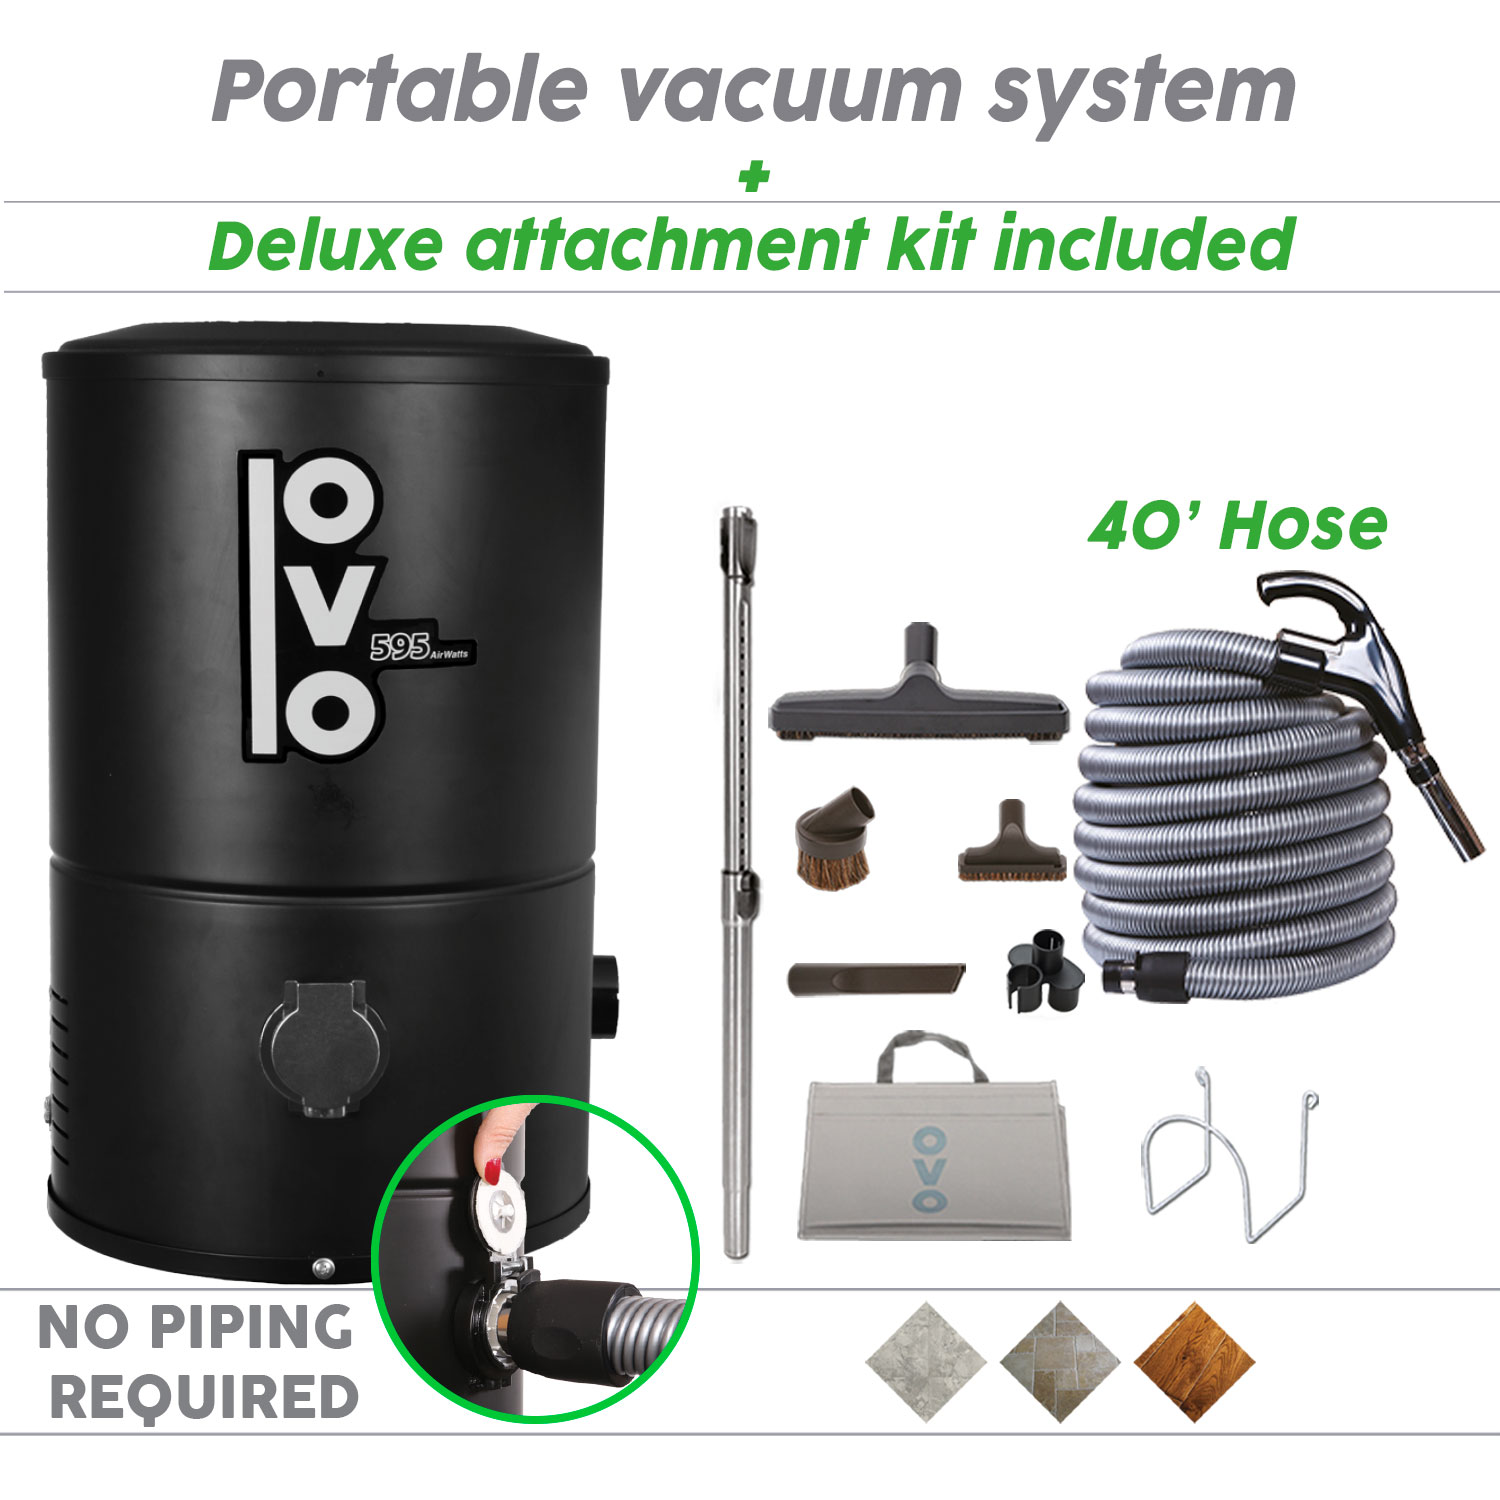 Wall mounted Vacuum Deluxe